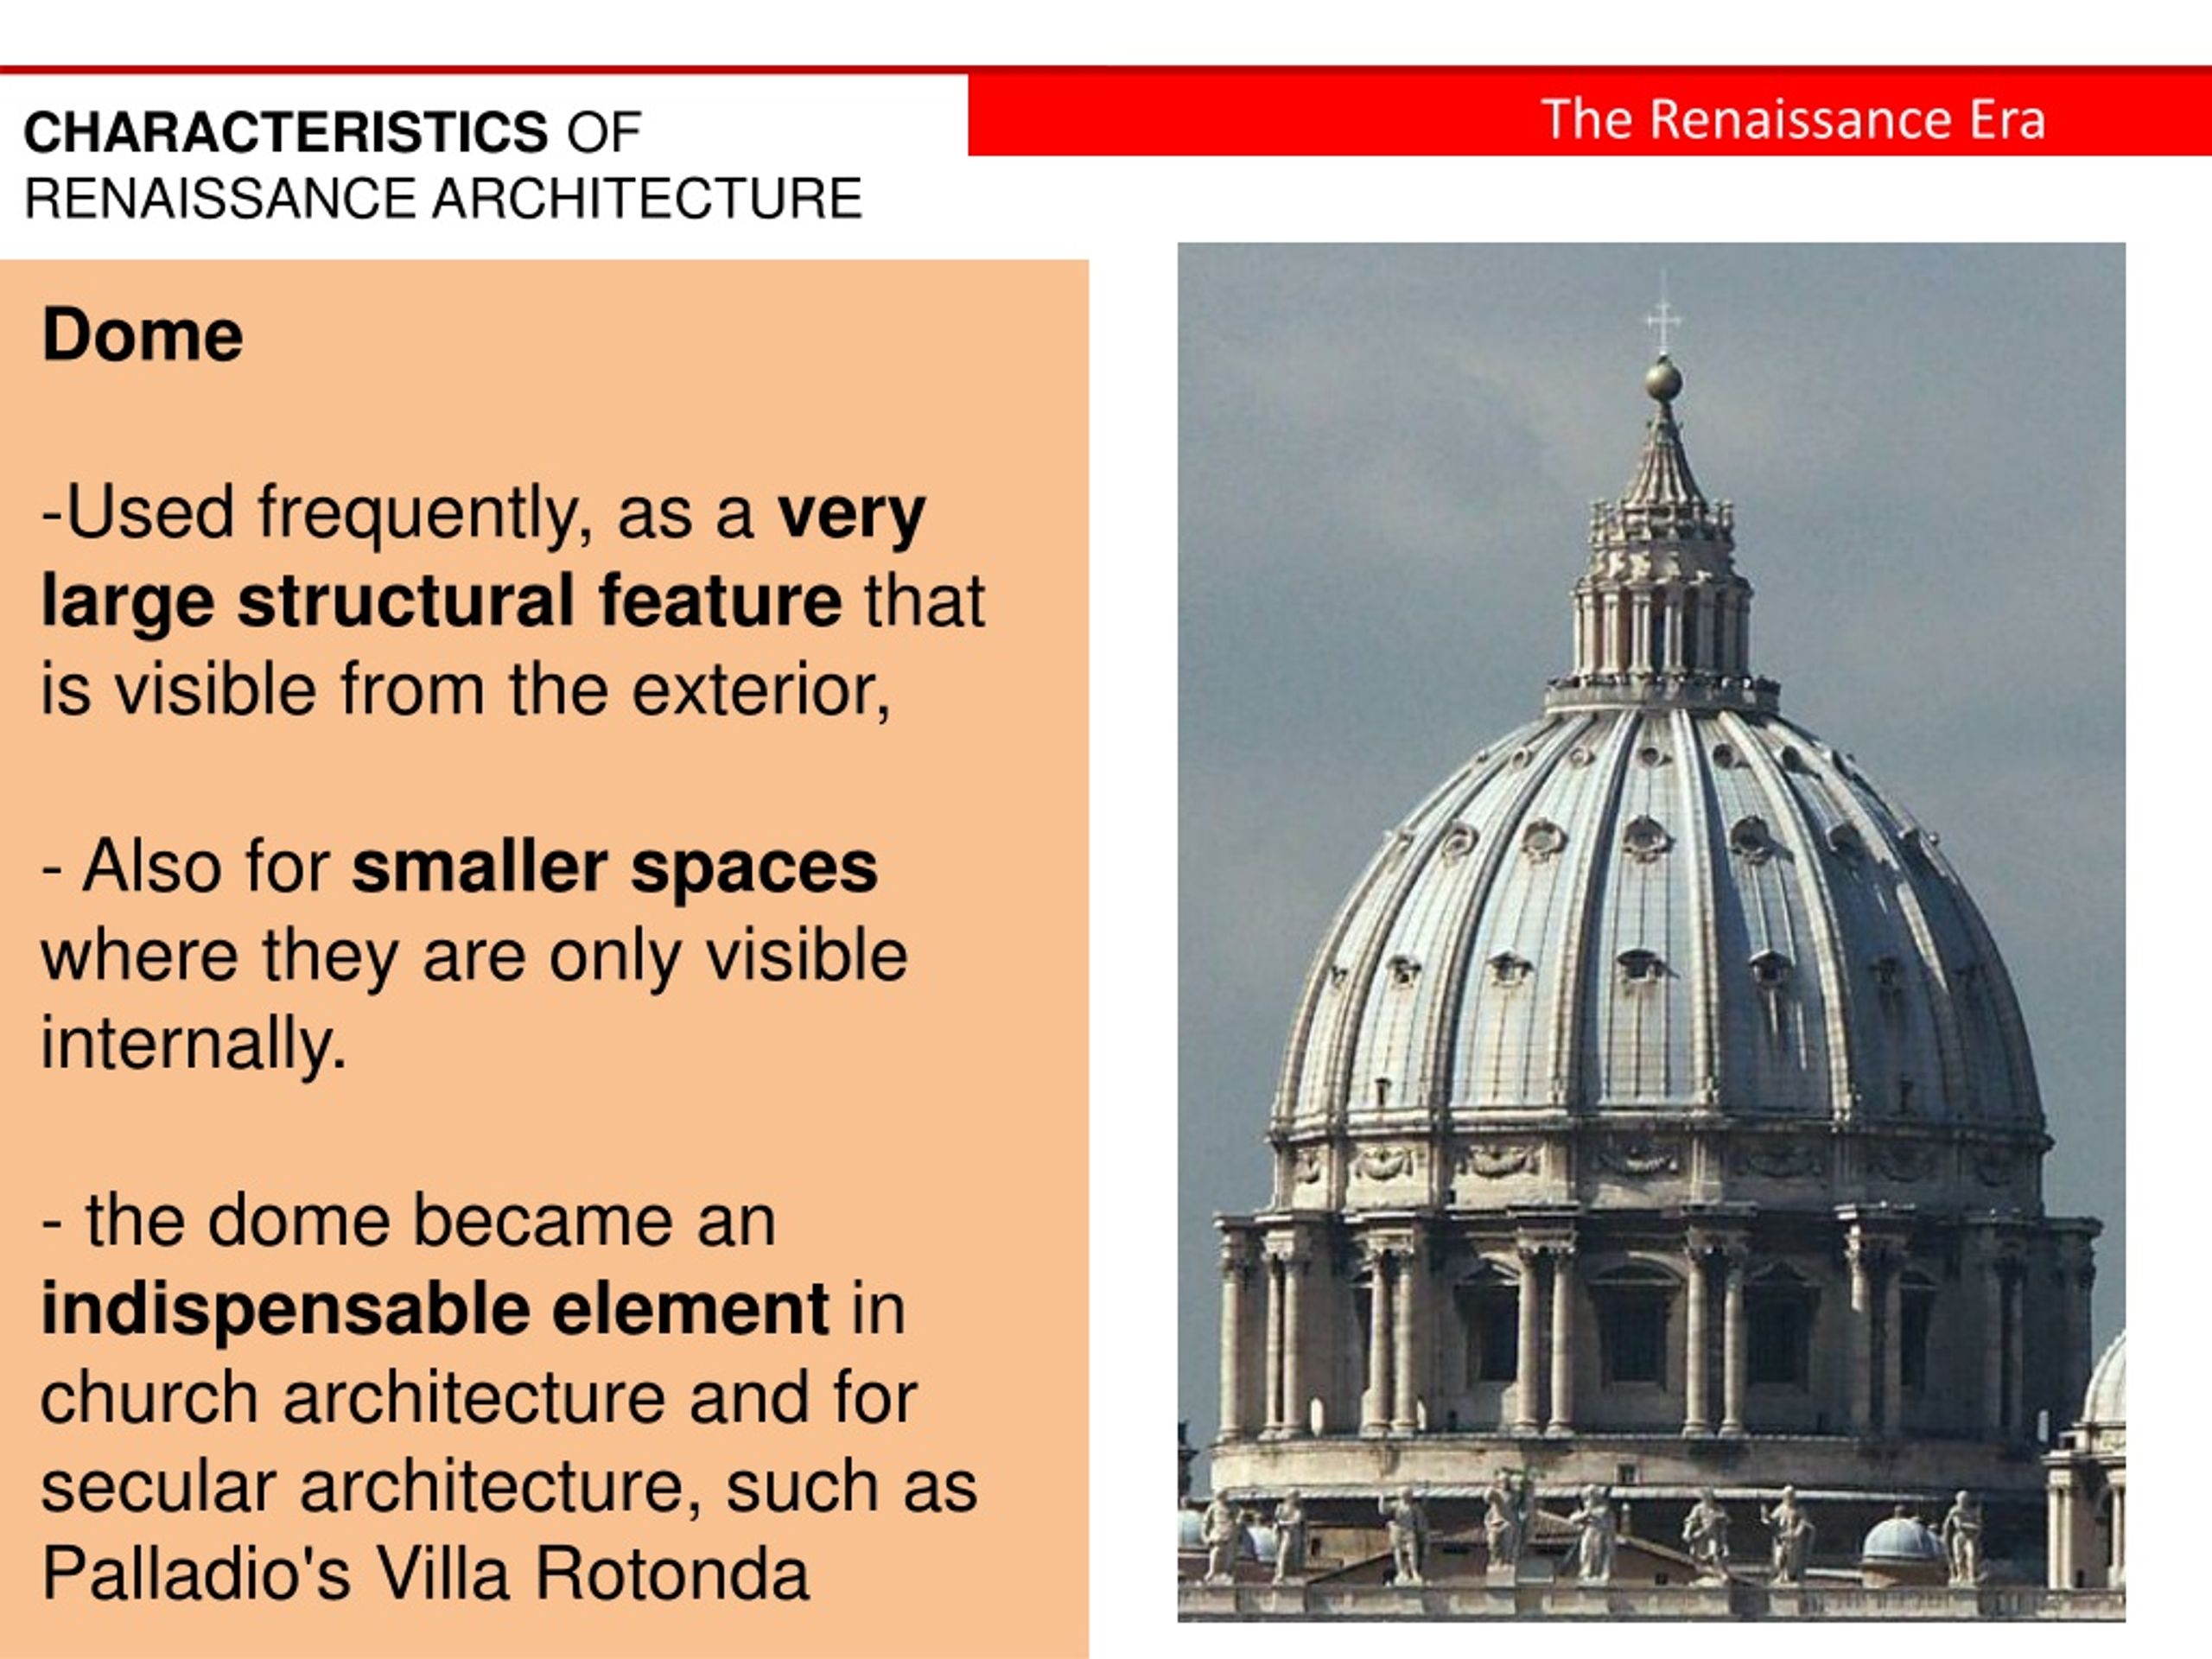 PPT ARCHITECTURE OF THE EARLY RENAISSANCE PowerPoint Presentation